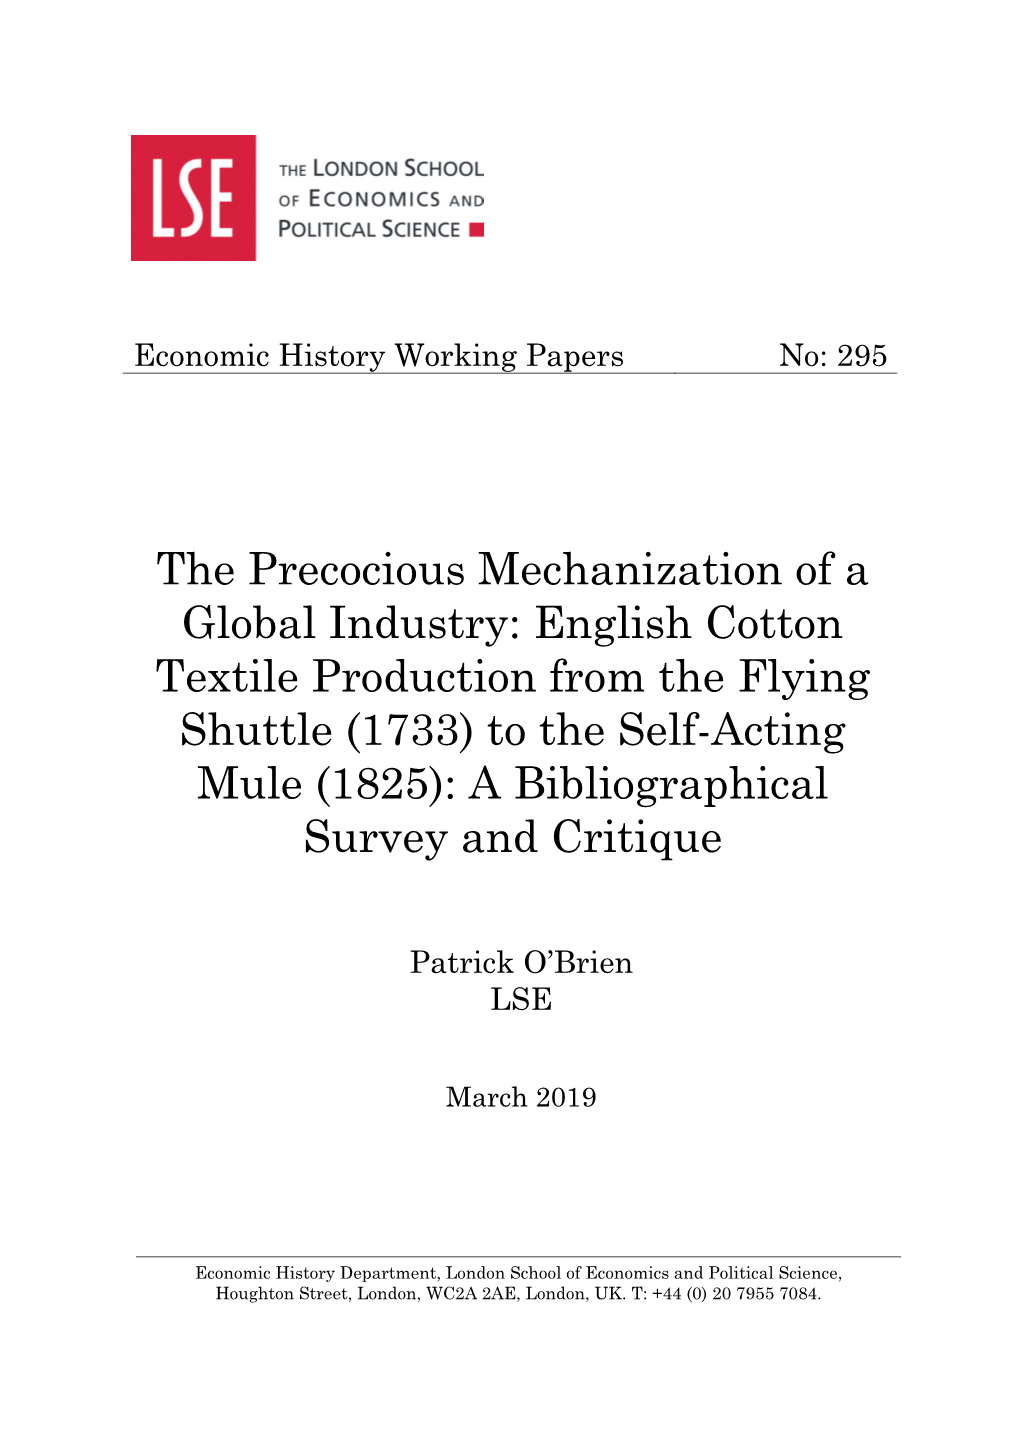 English Cotton Textile Production from the Flying Shuttle (1733) to the Self-Acting Mule (1825): a Bibliographical Survey and Critique* Patrick Karl O’Brien